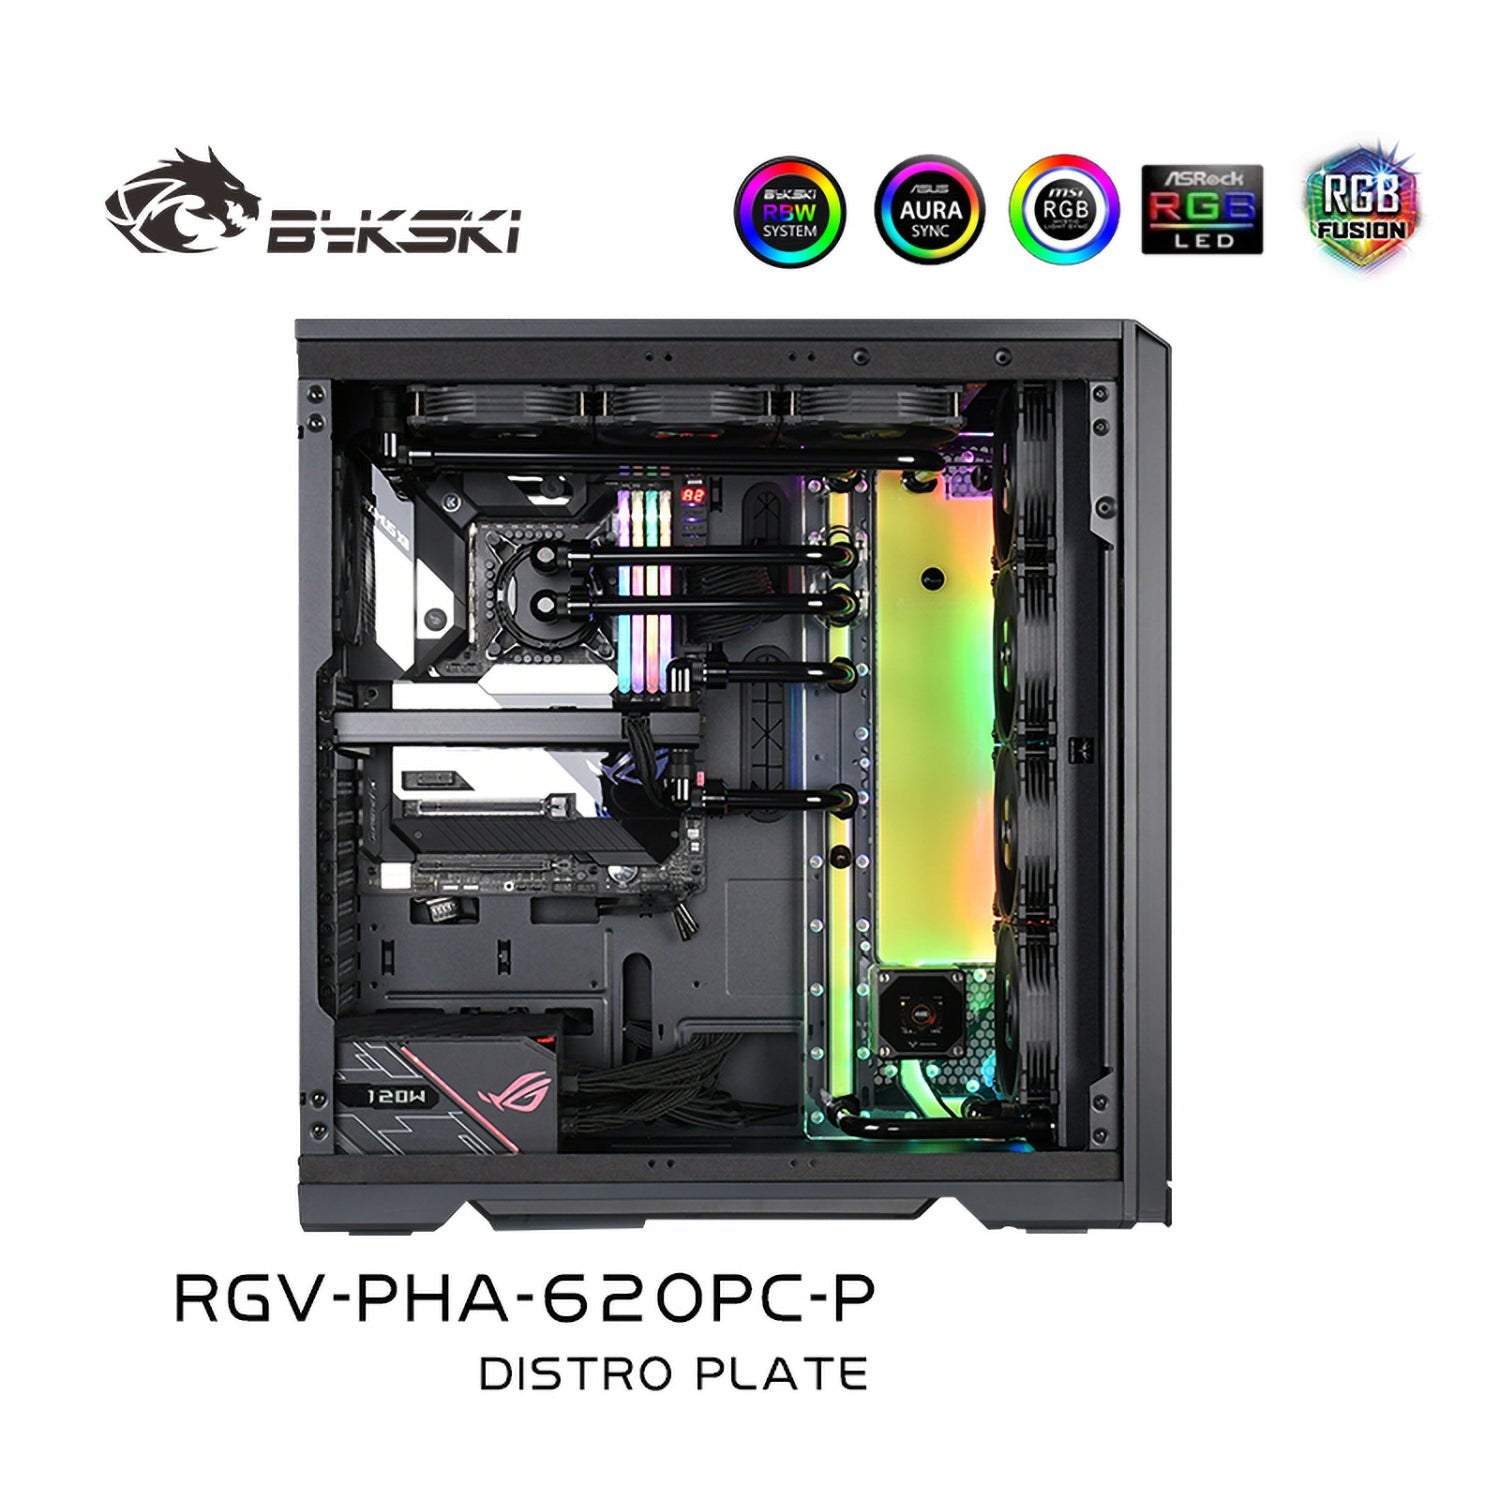 Granzon Advanced Distro Plate For Asus ROG Hyperion GR701 Case